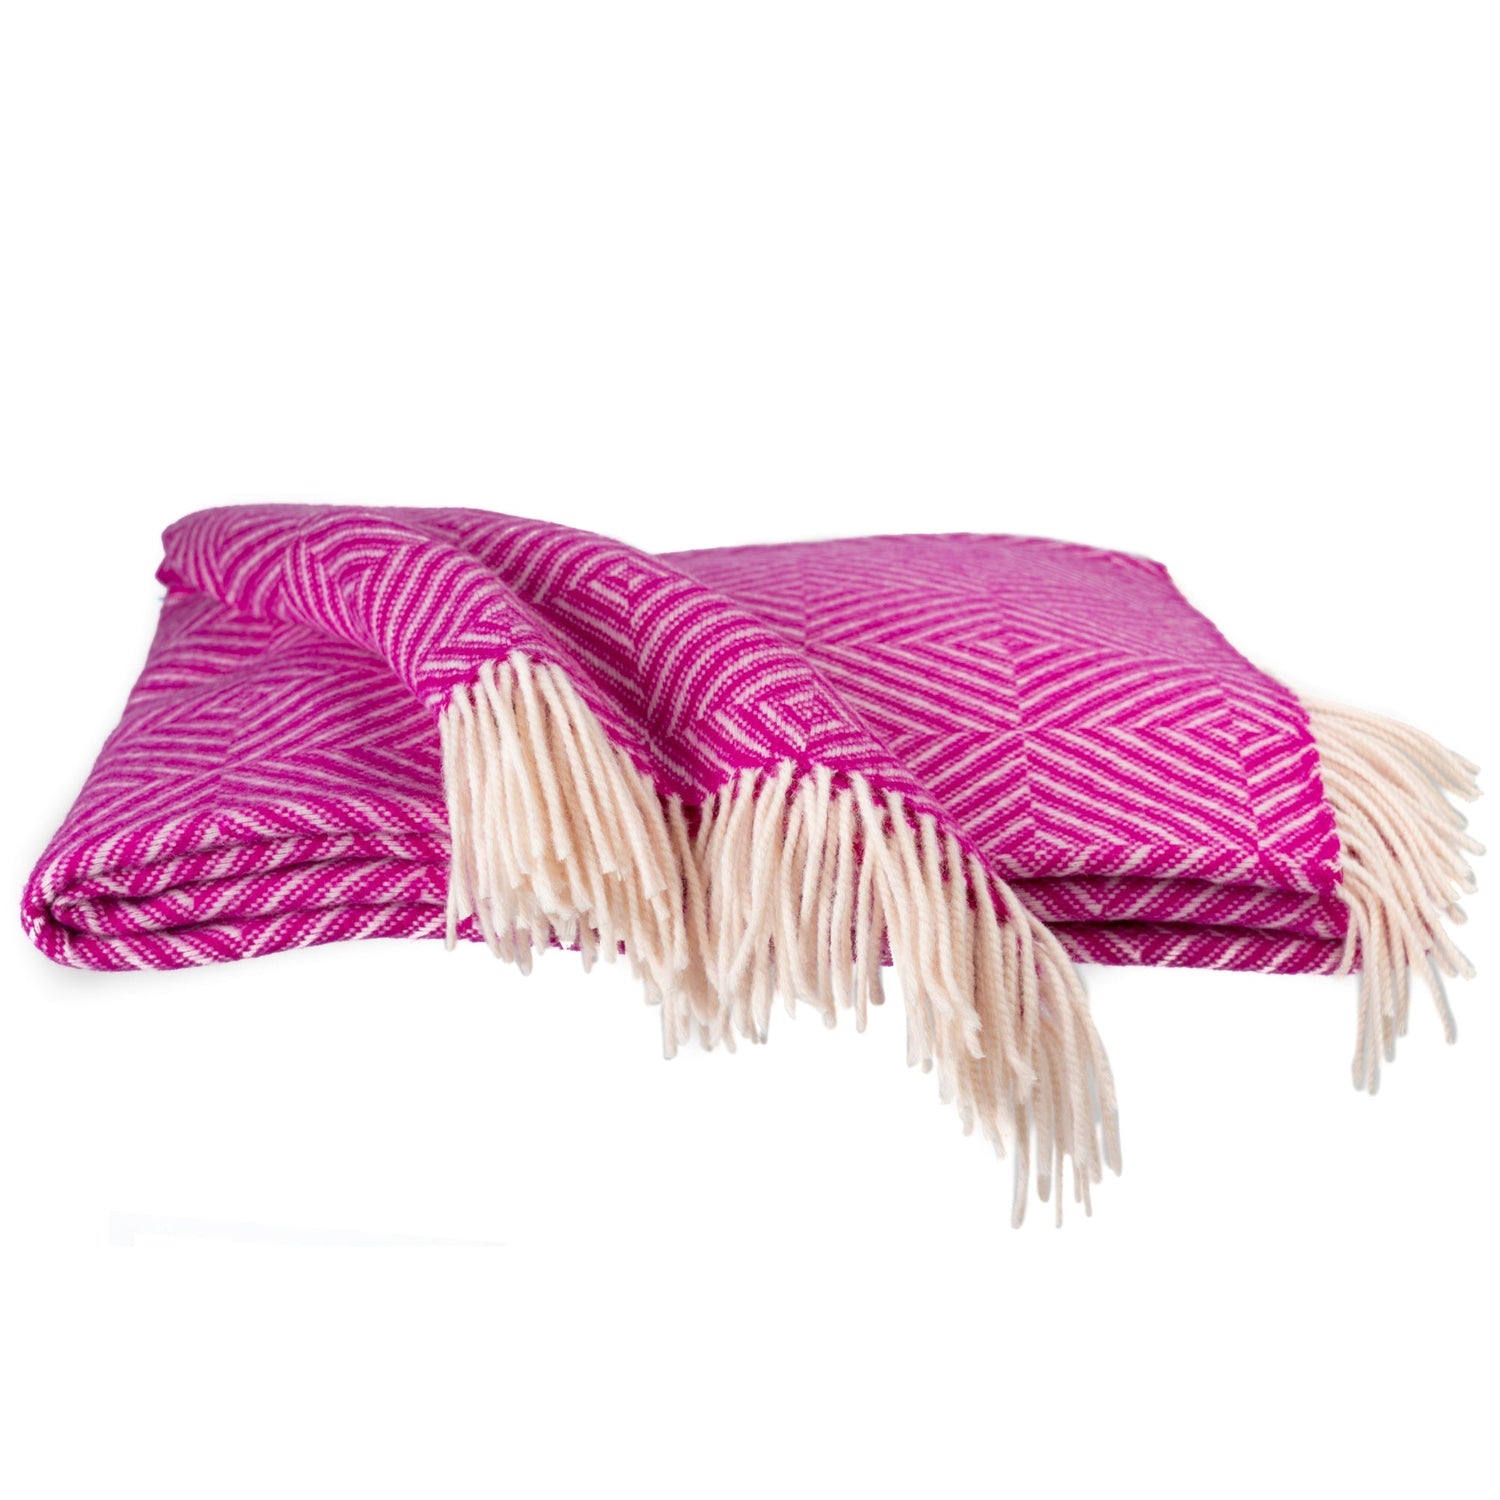 Southampton Home Merino Wool Geometric Throw (Pink)-Throws and Blankets-GeoPink-Prince of Scots